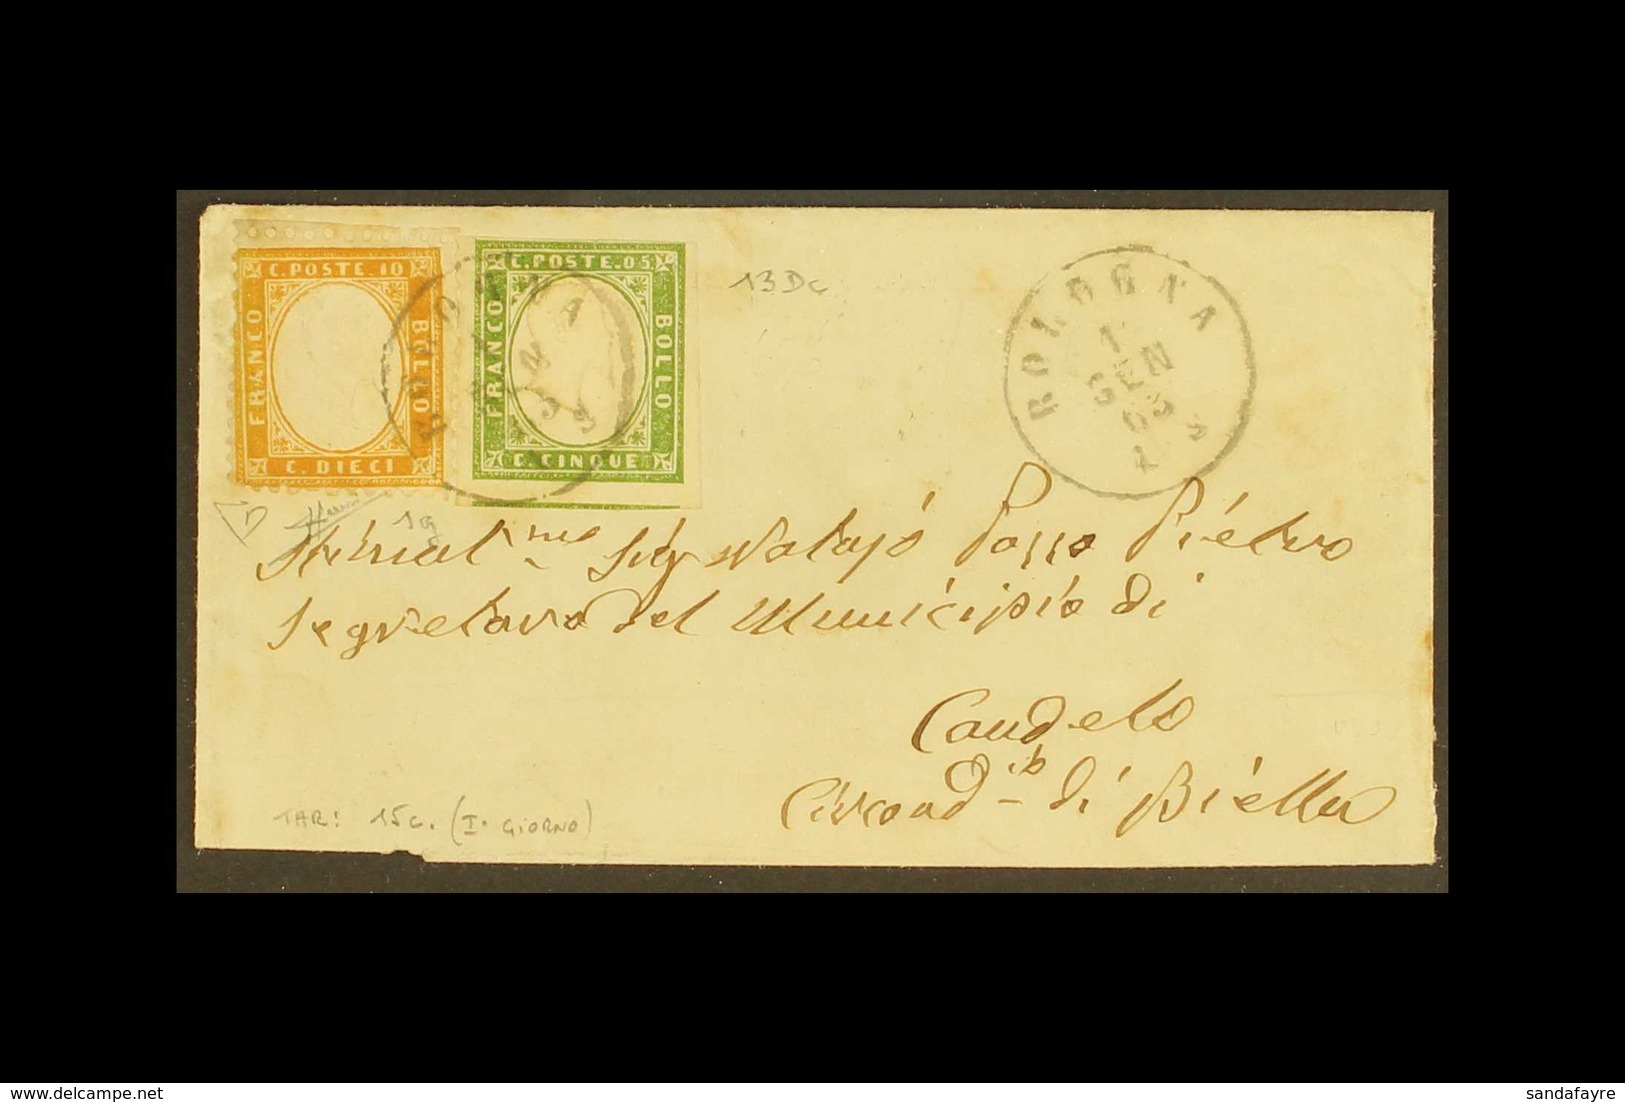 1863 FIRST DAY NEW UNIFIED 15 CENT ITALIAN POSTAL RATE Important Cover From Bologna To Candelo Franked Italy 1852 10c Or - Unclassified